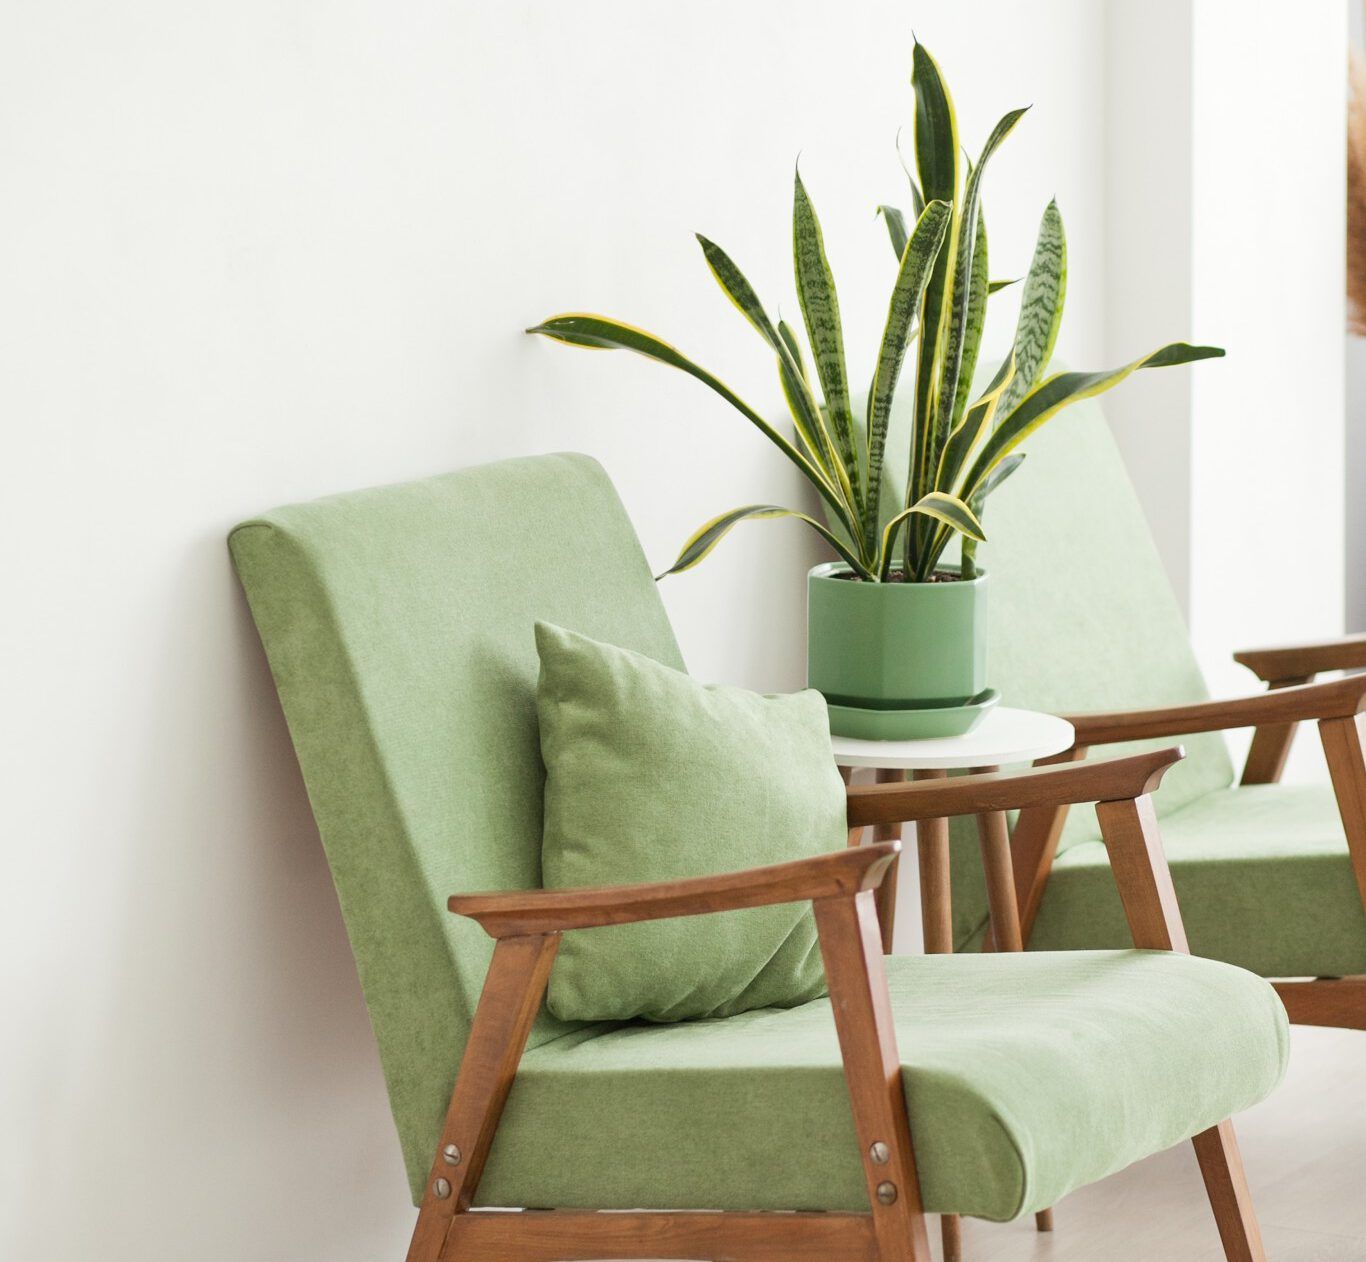 green chairs and plants in therapist office in Brooklyn, NY